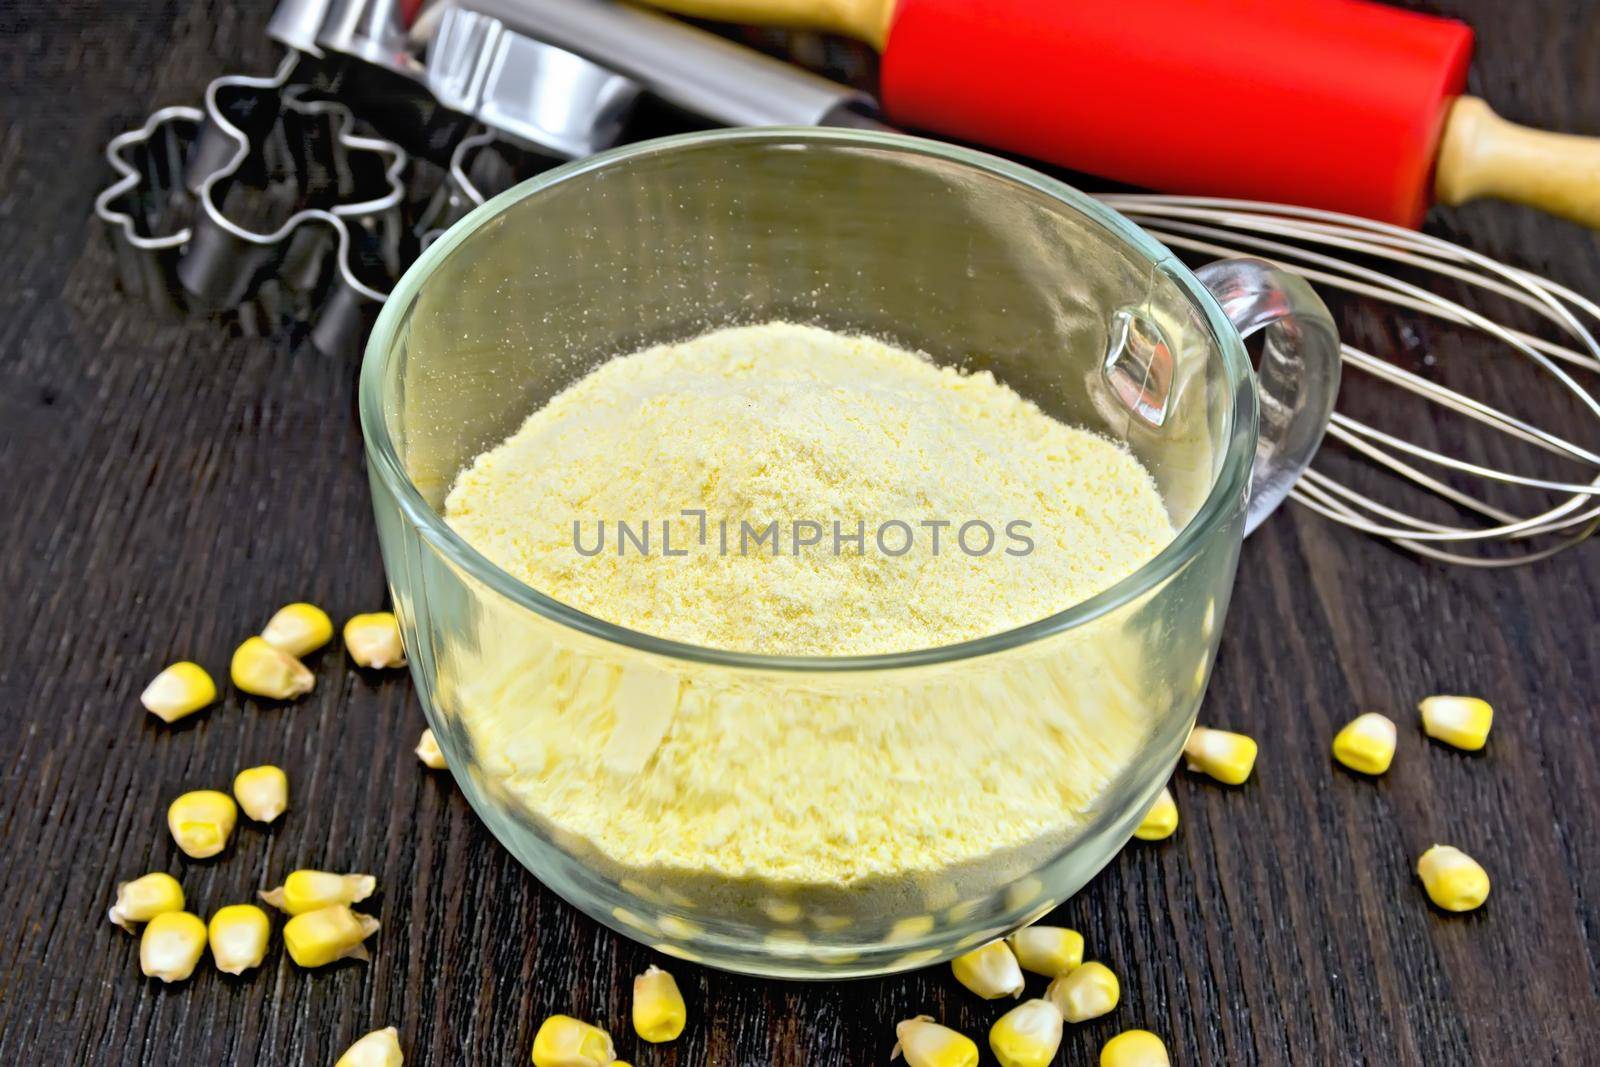 Flour corn in a glass cup, grain, rolling pin and metal cookie cutters on a wooden board